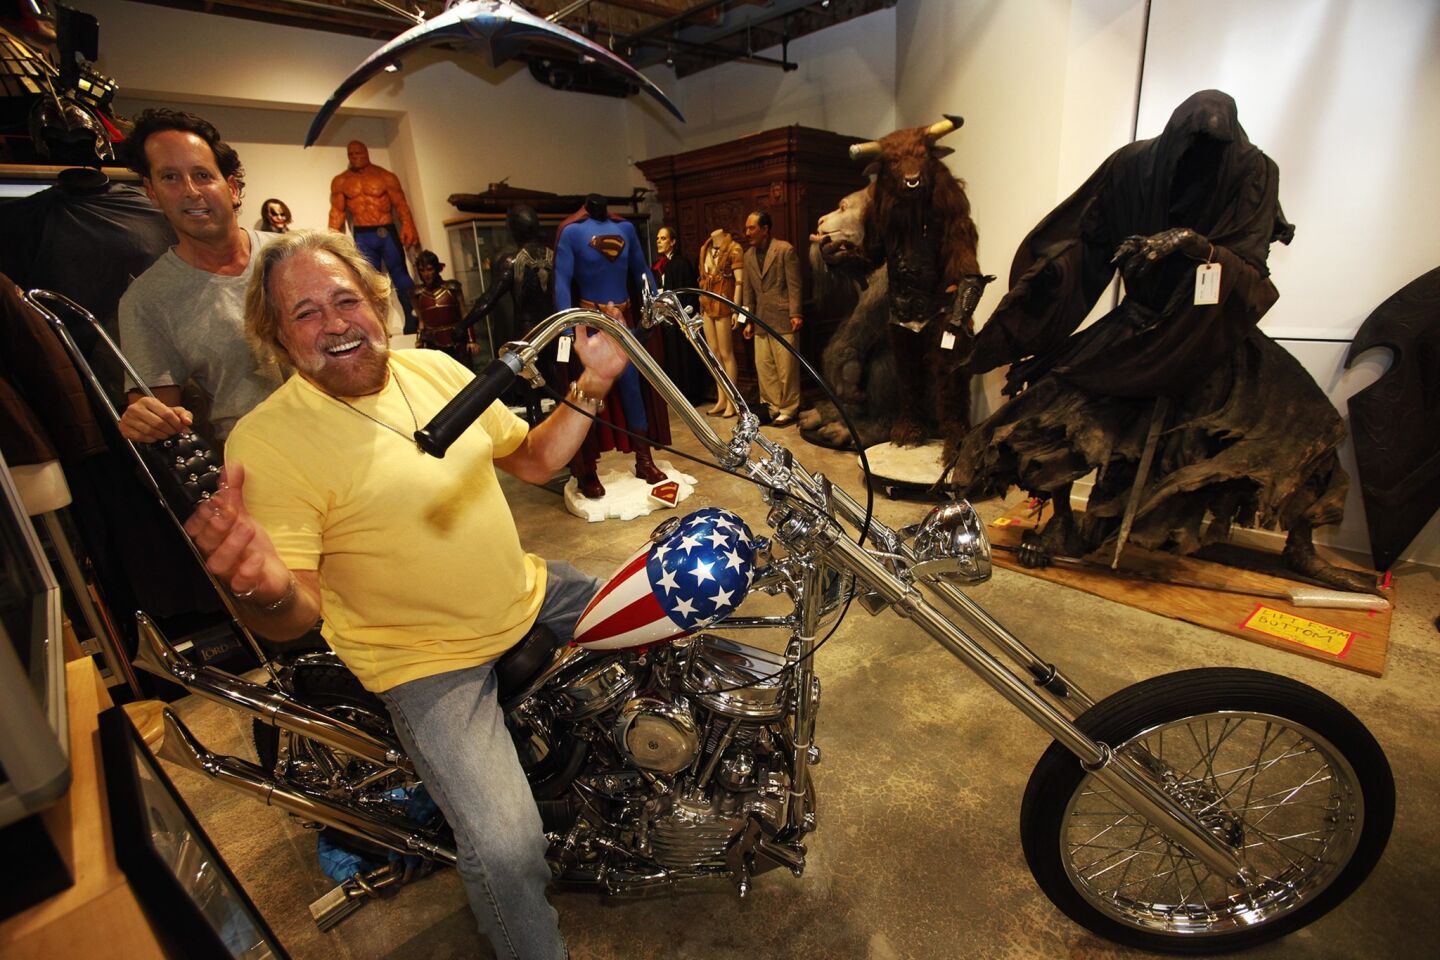 Michael Eisenberg, left, insists his "Captain America" motorcycle is the one from the iconic counterculture film "Easy Rider." Why? Because actor Dan Haggerty, right, says it is.